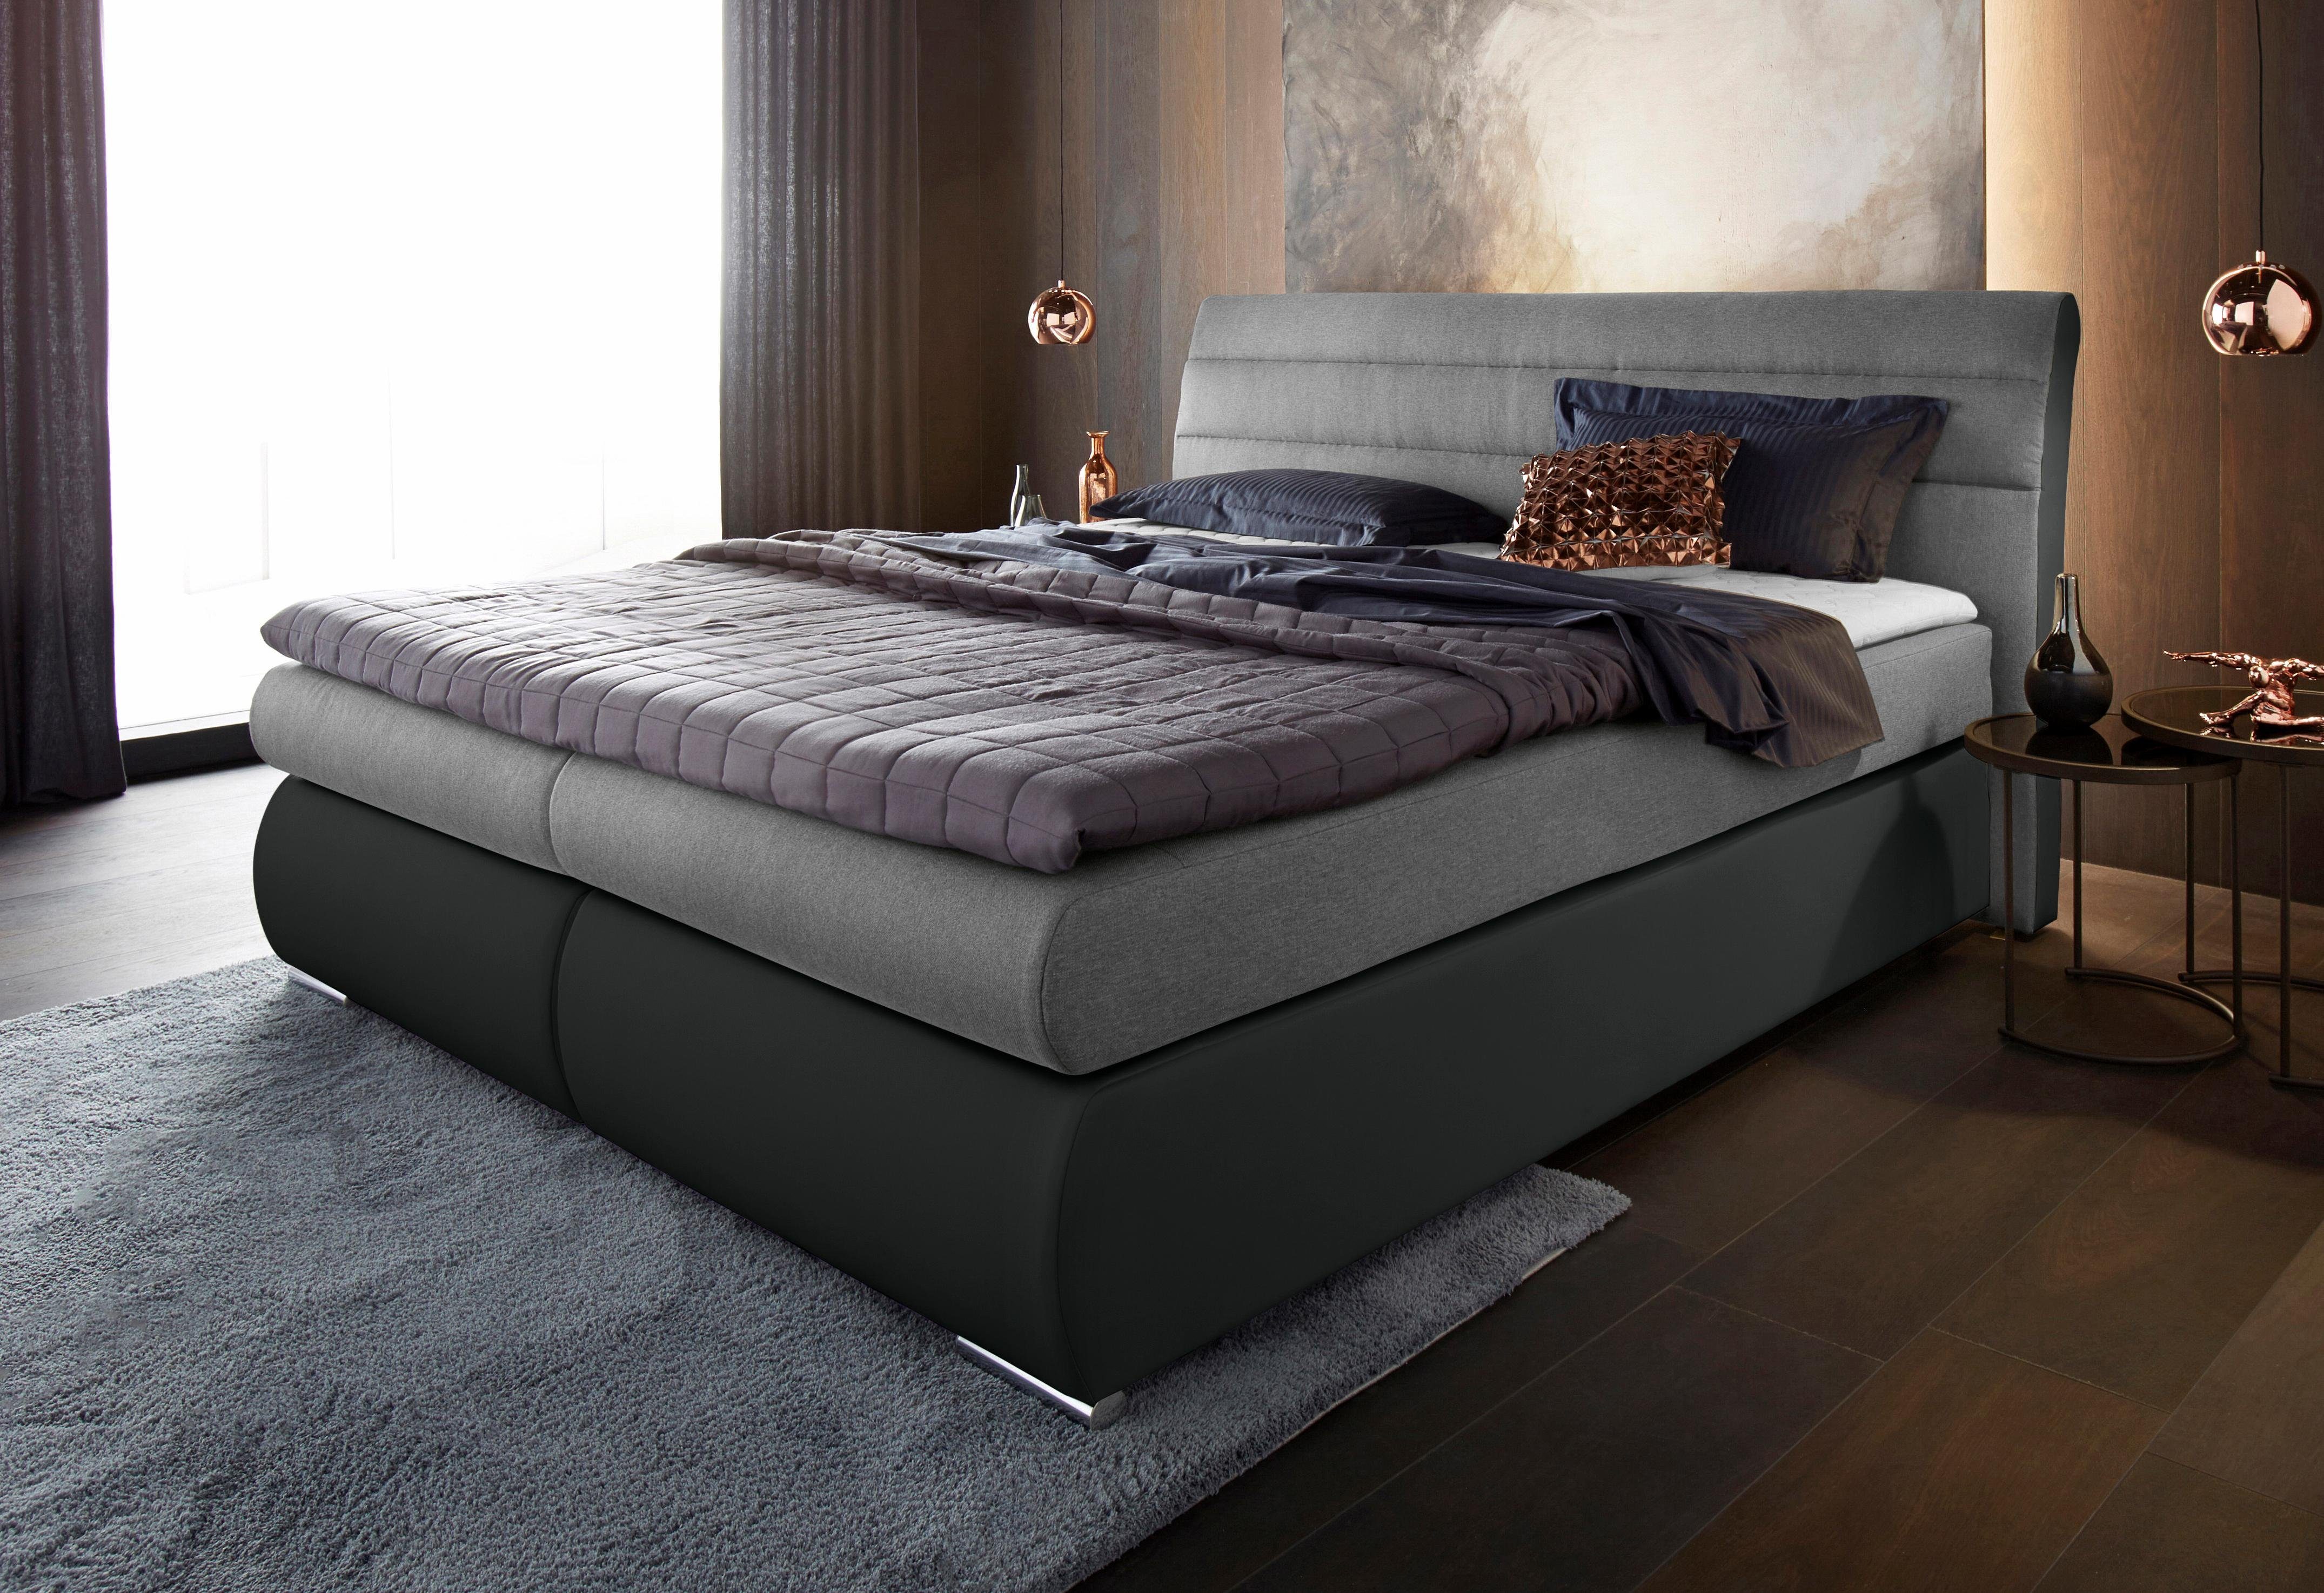 Places of Style Boxspring Luna in structuur-/imitatieleermix, extra lang 220 cm, tot 3 hardheden